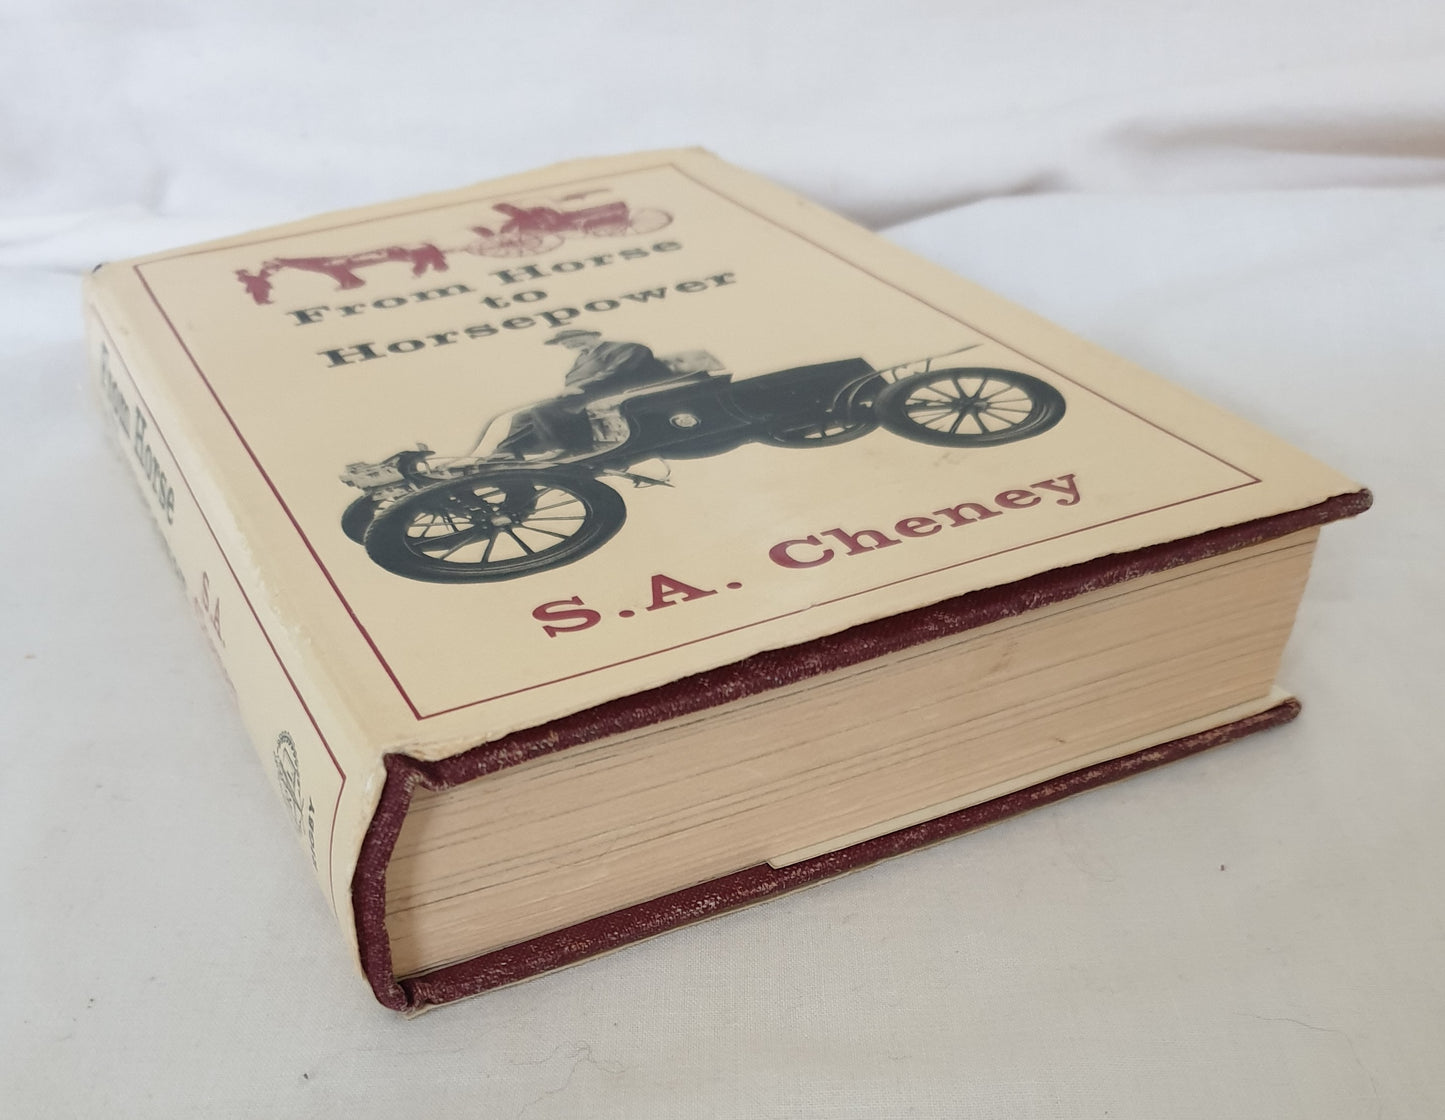 From Horse to Horsepower by S. A. Cheney